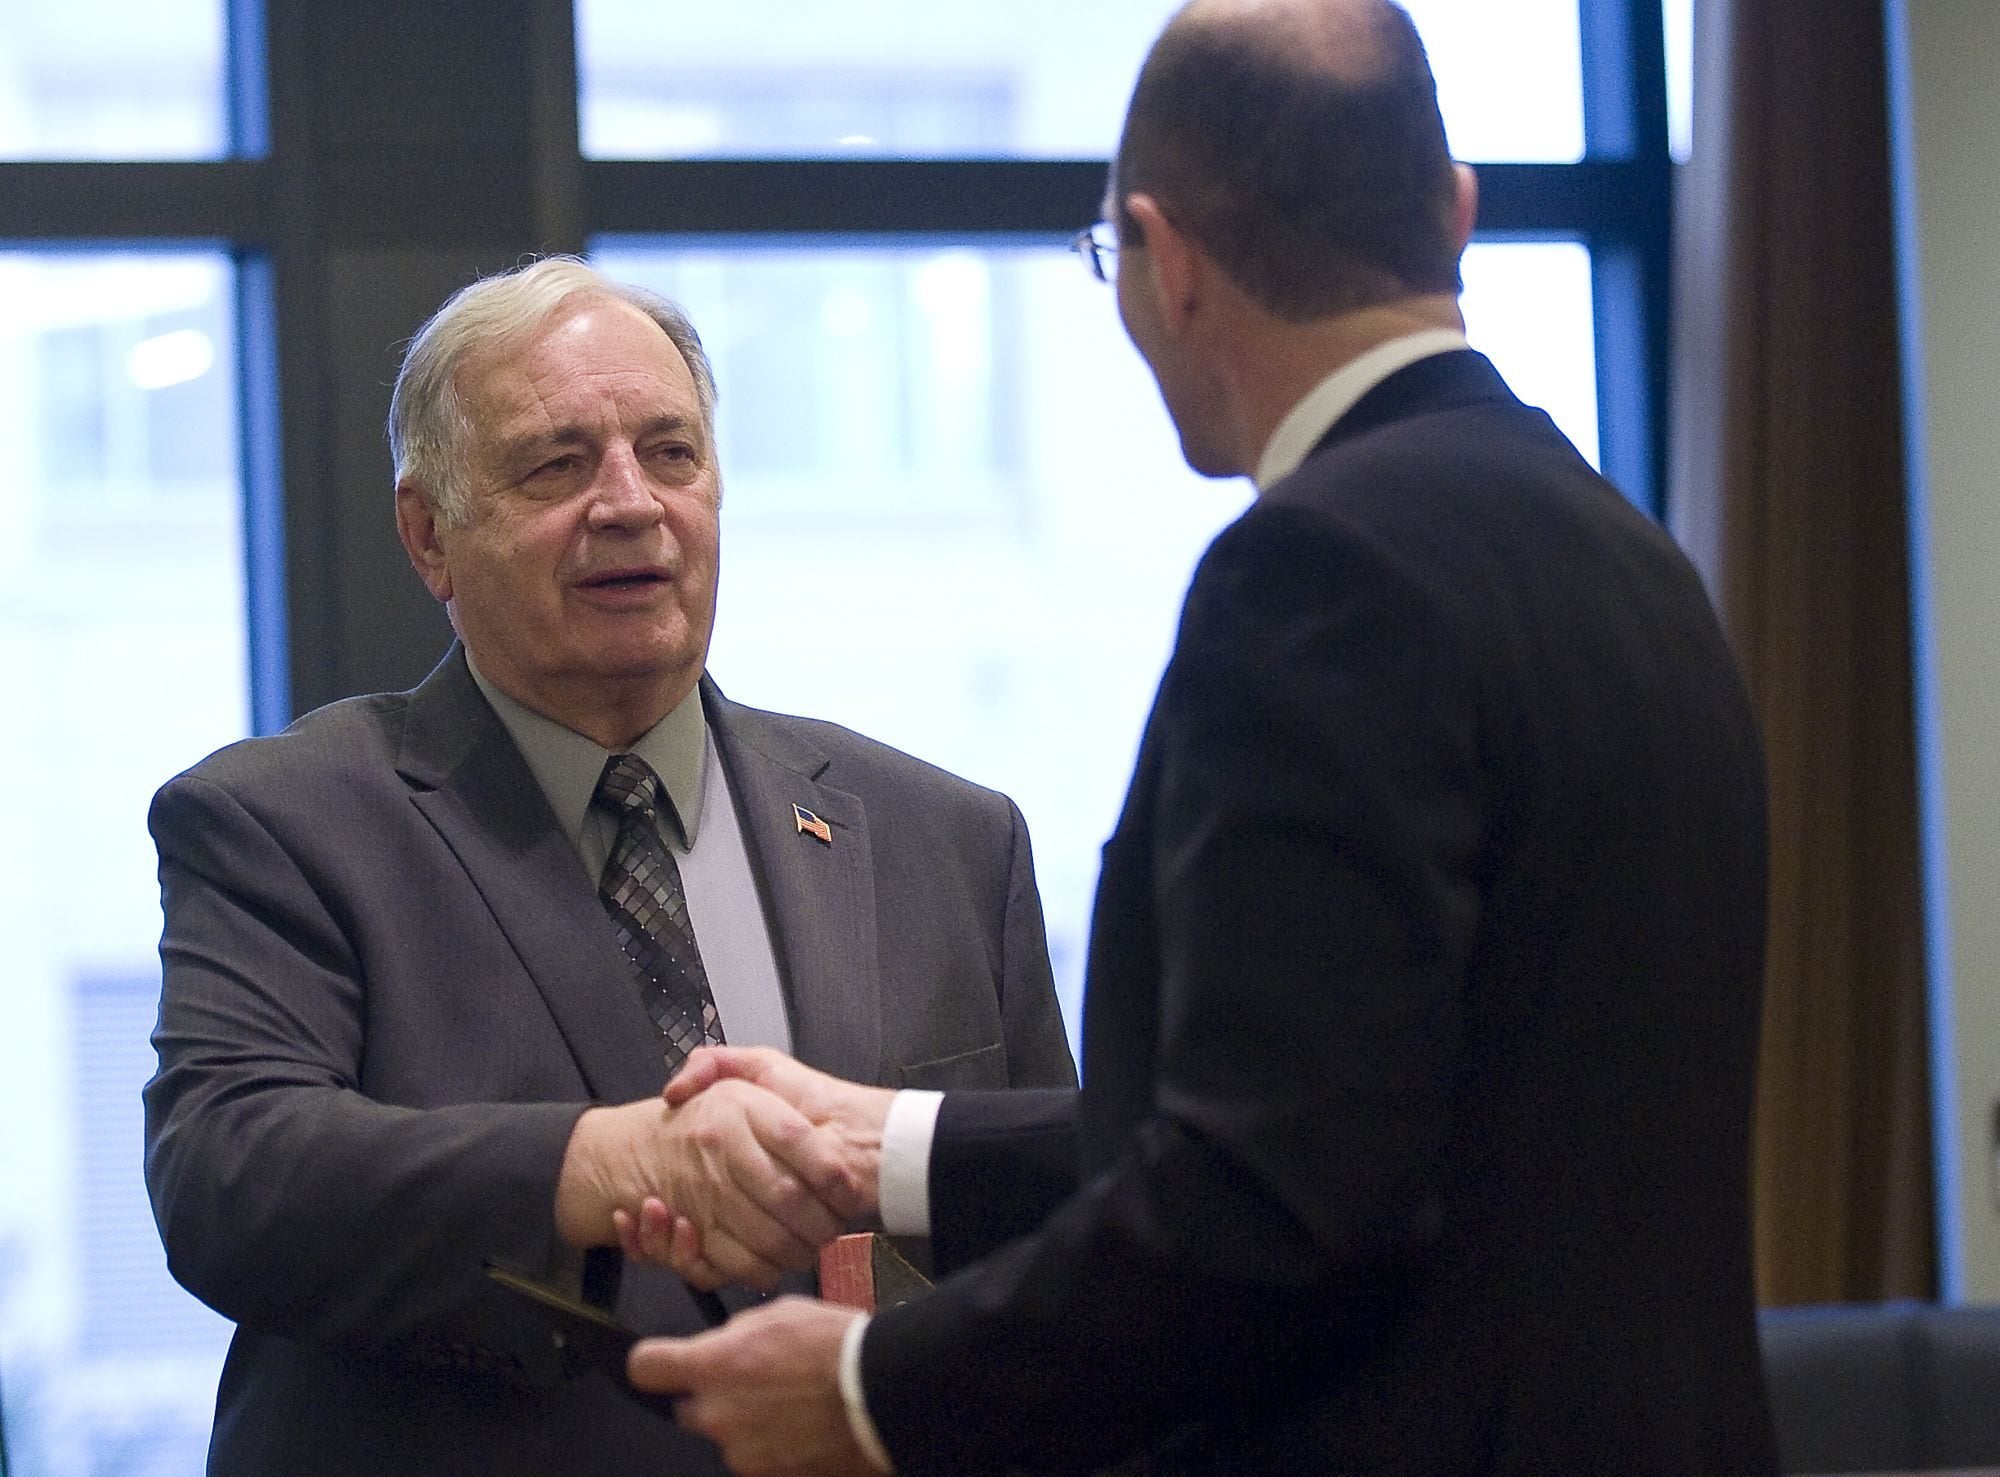 New City Councilor Bill Turlay shakes hands with County Auditor Greg Kimsey after he was sworn in at at City Hall on Thursday morning.